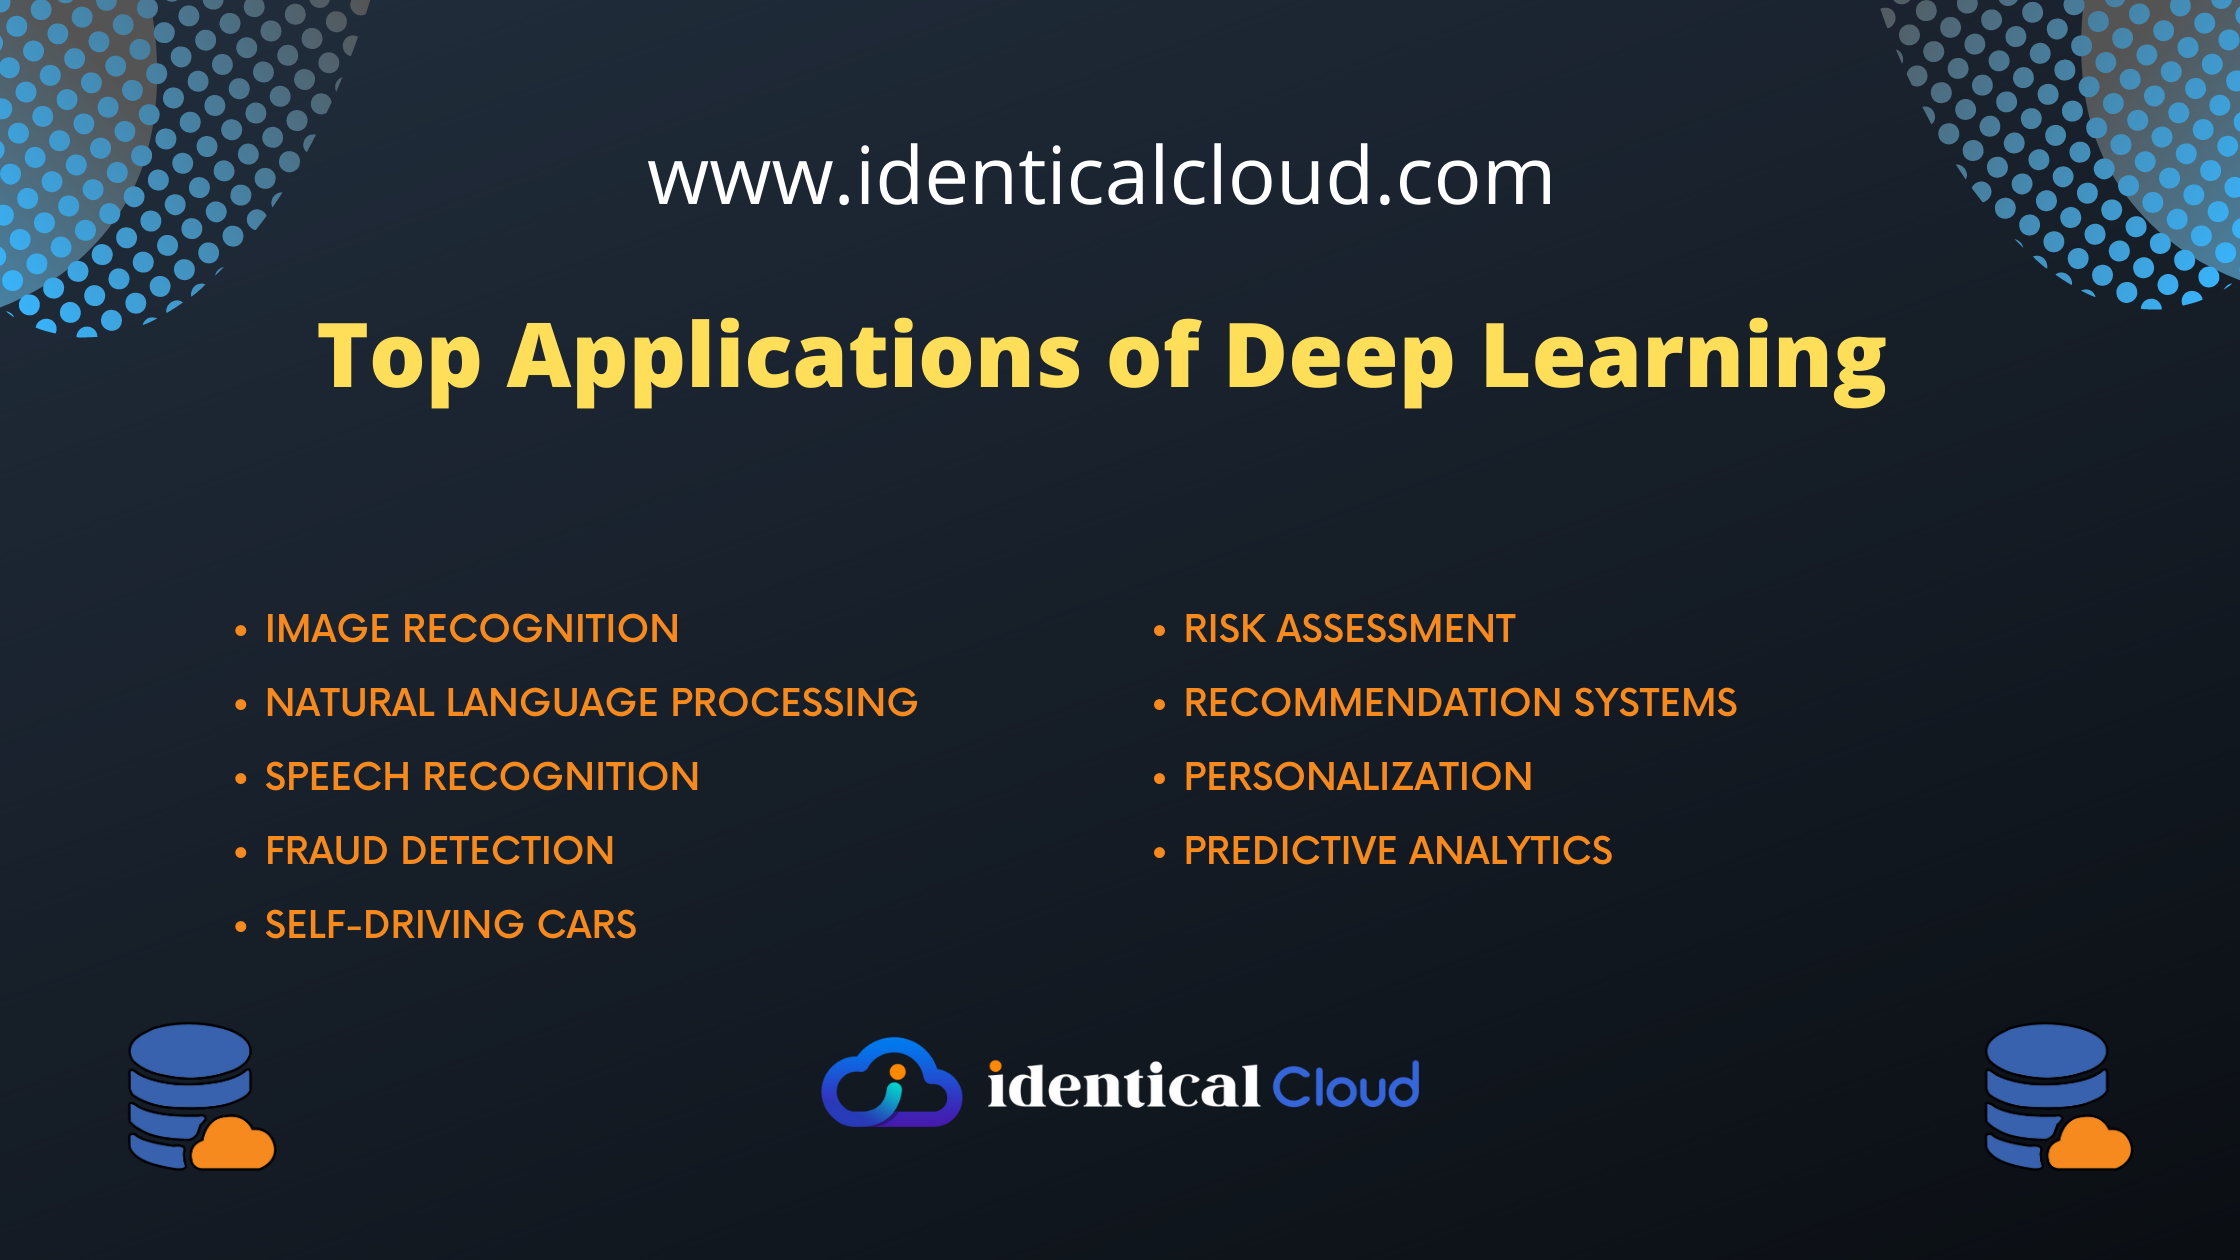 Top Applications of Deep Learning - identicalcloud.com